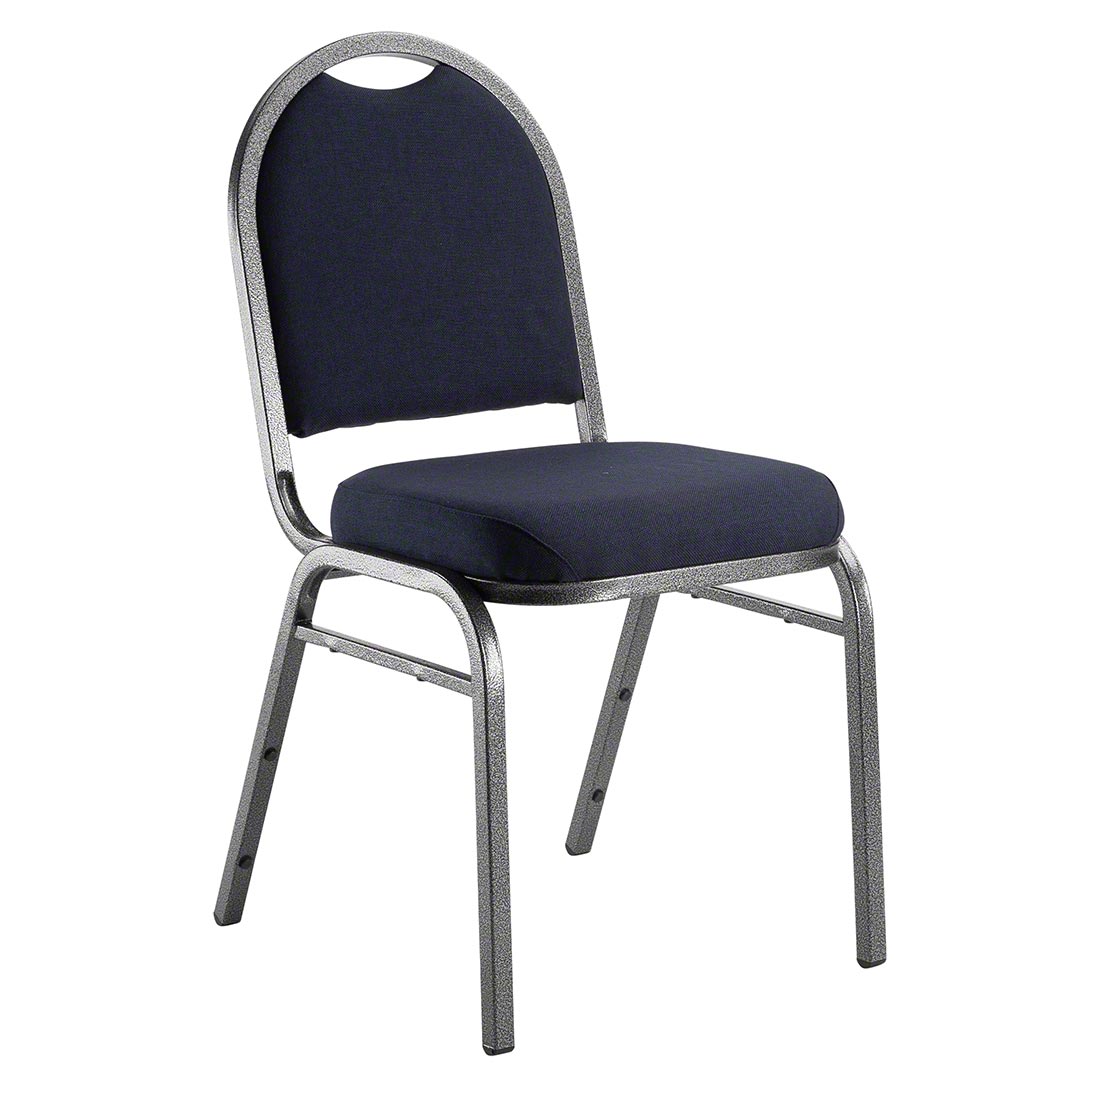 Staging Chair Bumper